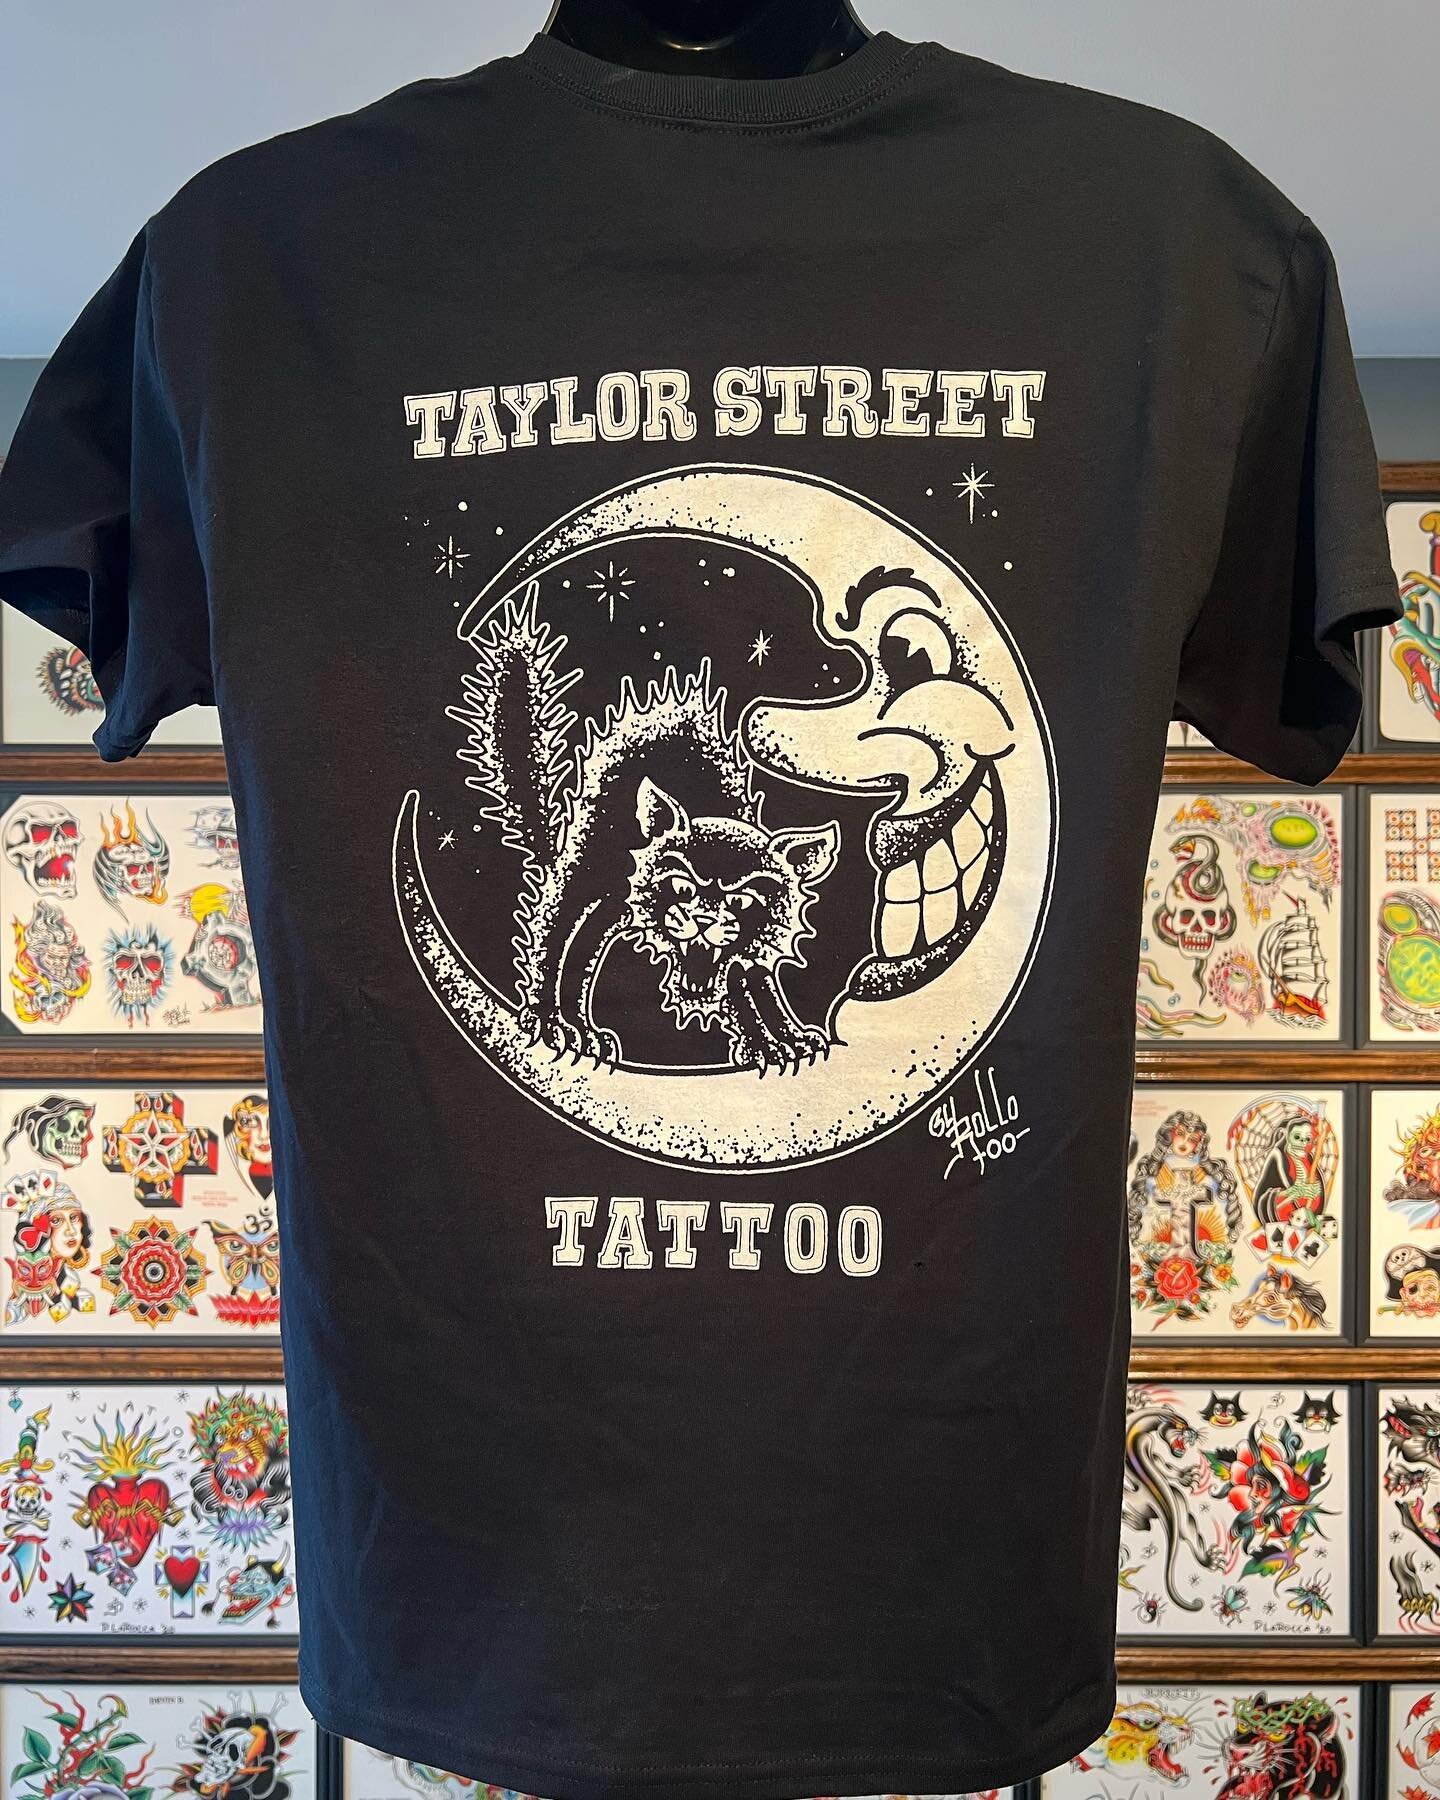 Our seriously spooky Rollo Halloween shirts are in! Available for $30 or $20 with one of our frightening Halloween flash tattoos. See you soon.